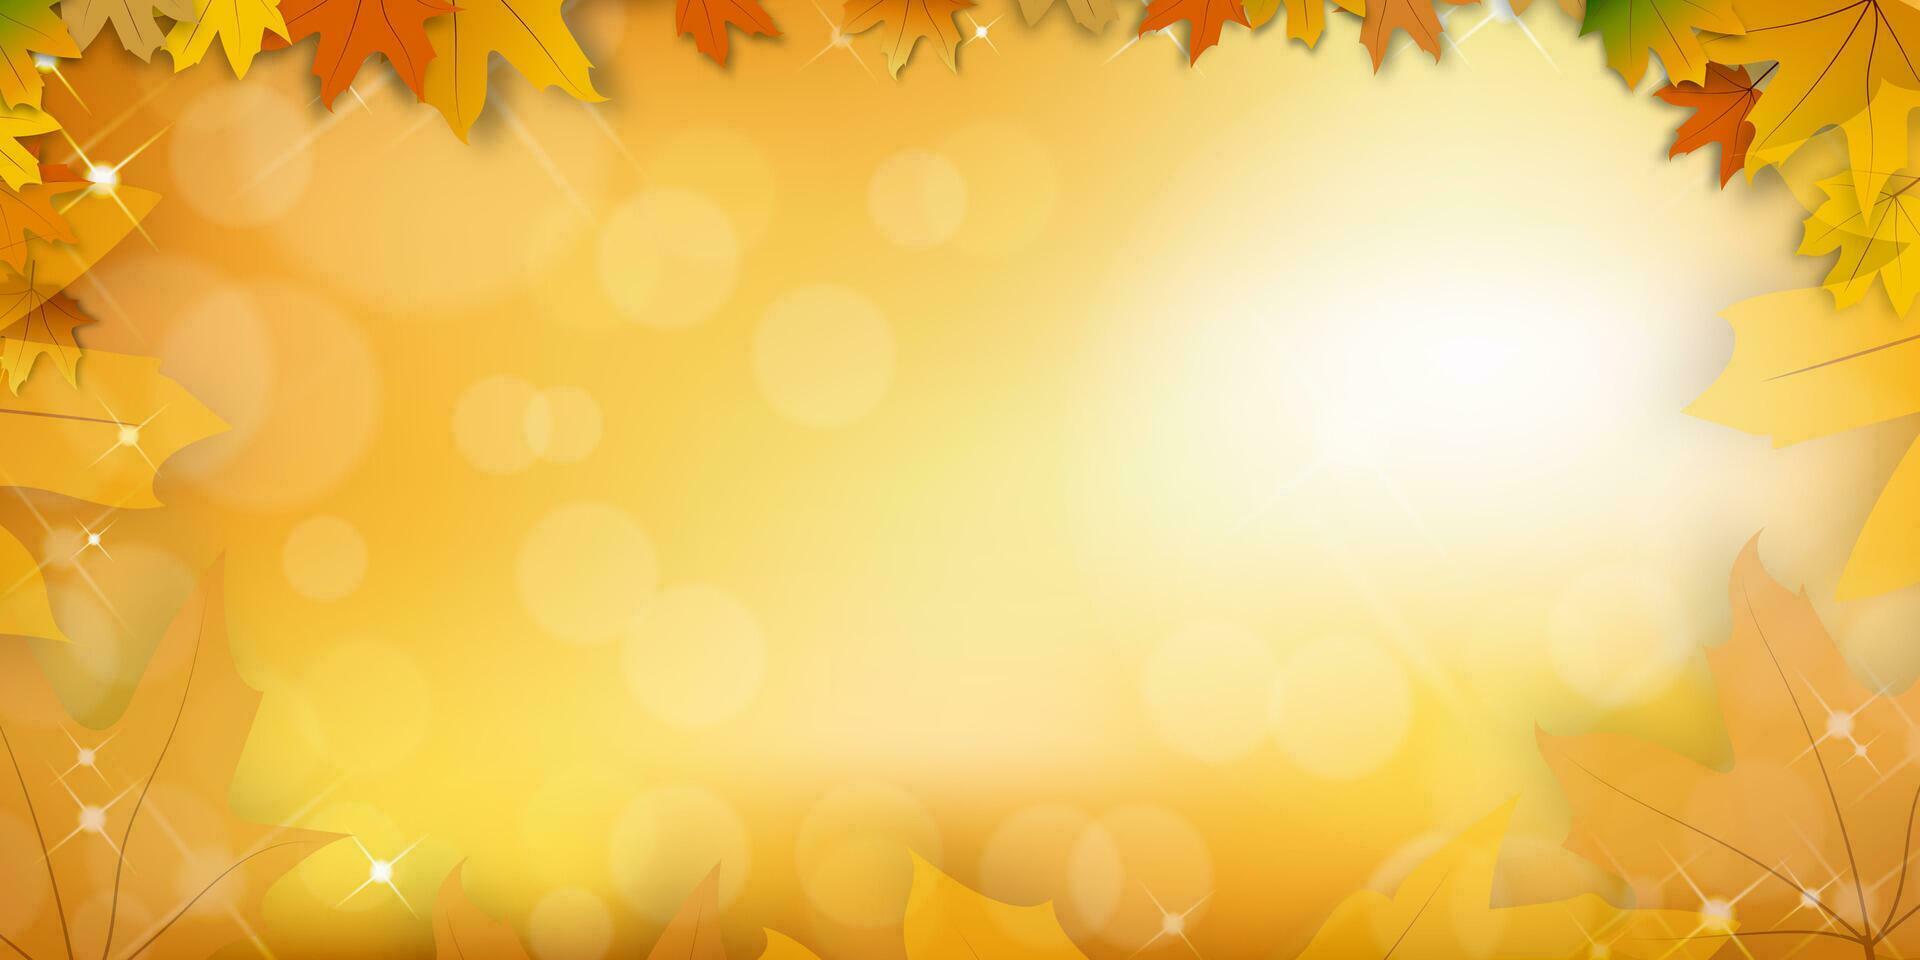 Autumn background,Fall or Maple Leaves border frame with bokeh nature light on orange background,Fall season concept with maple foliage on defocused sunlight effect with copy space vector